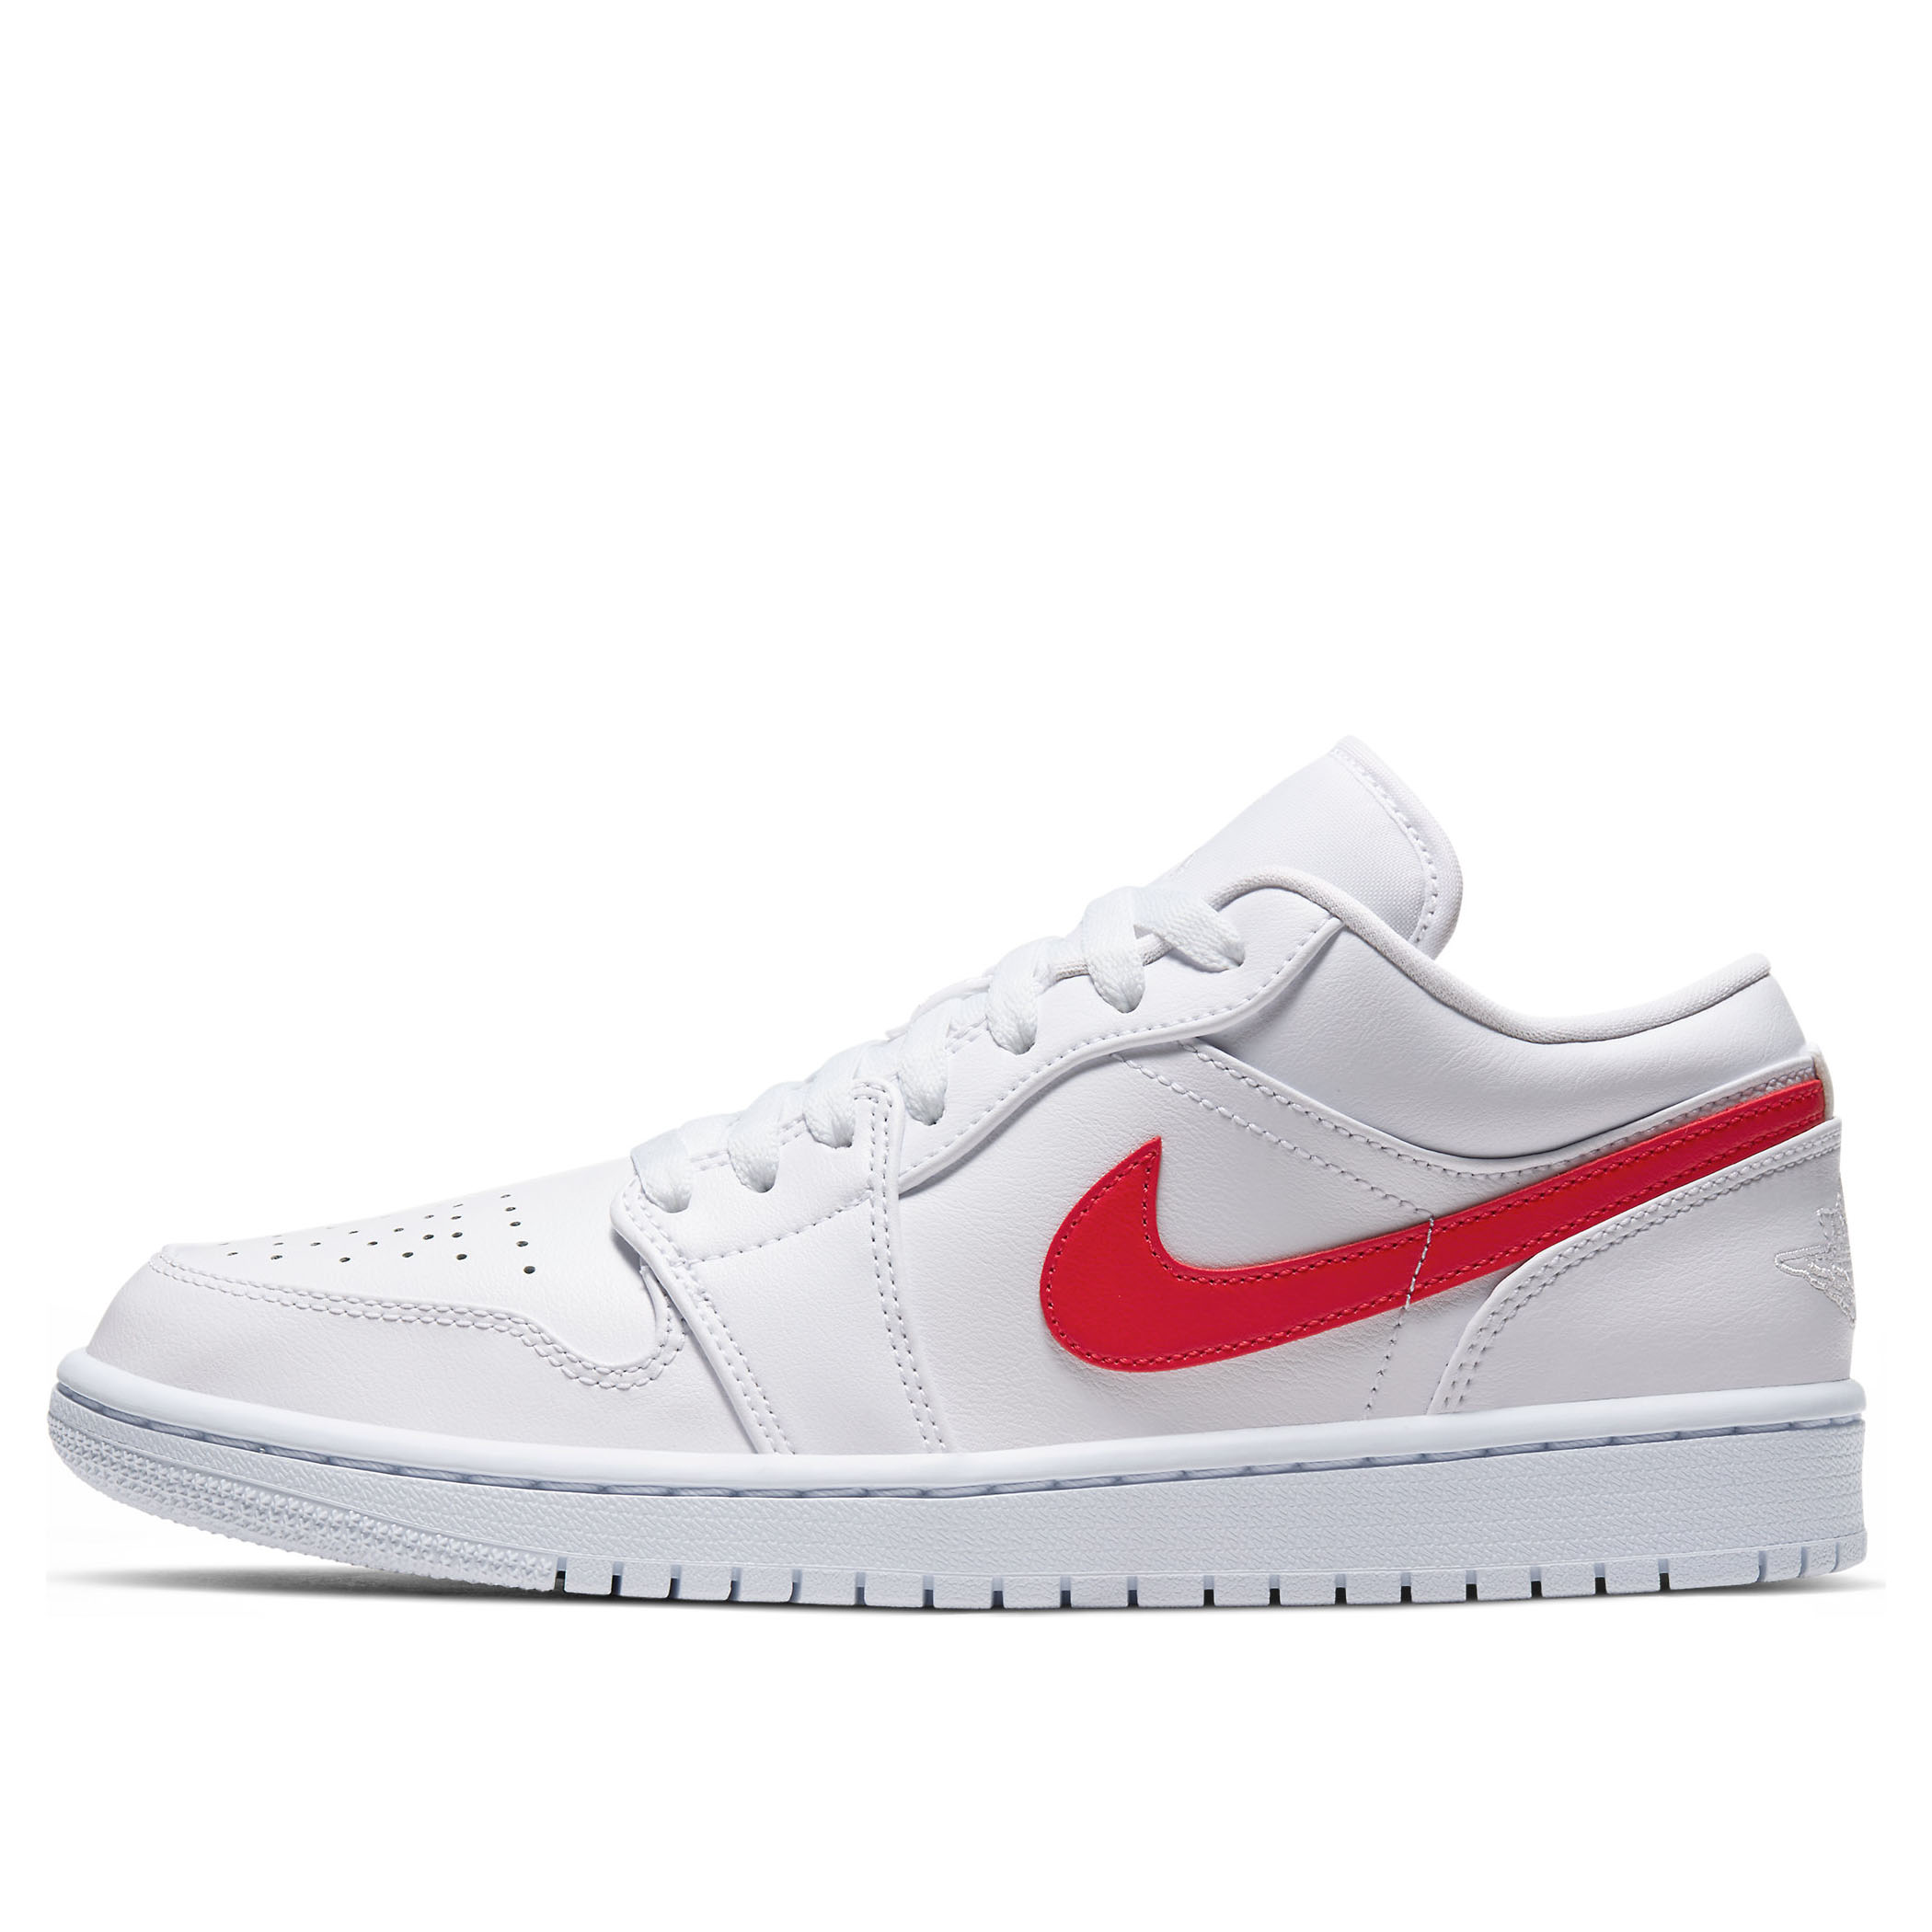 red and white aj1 low